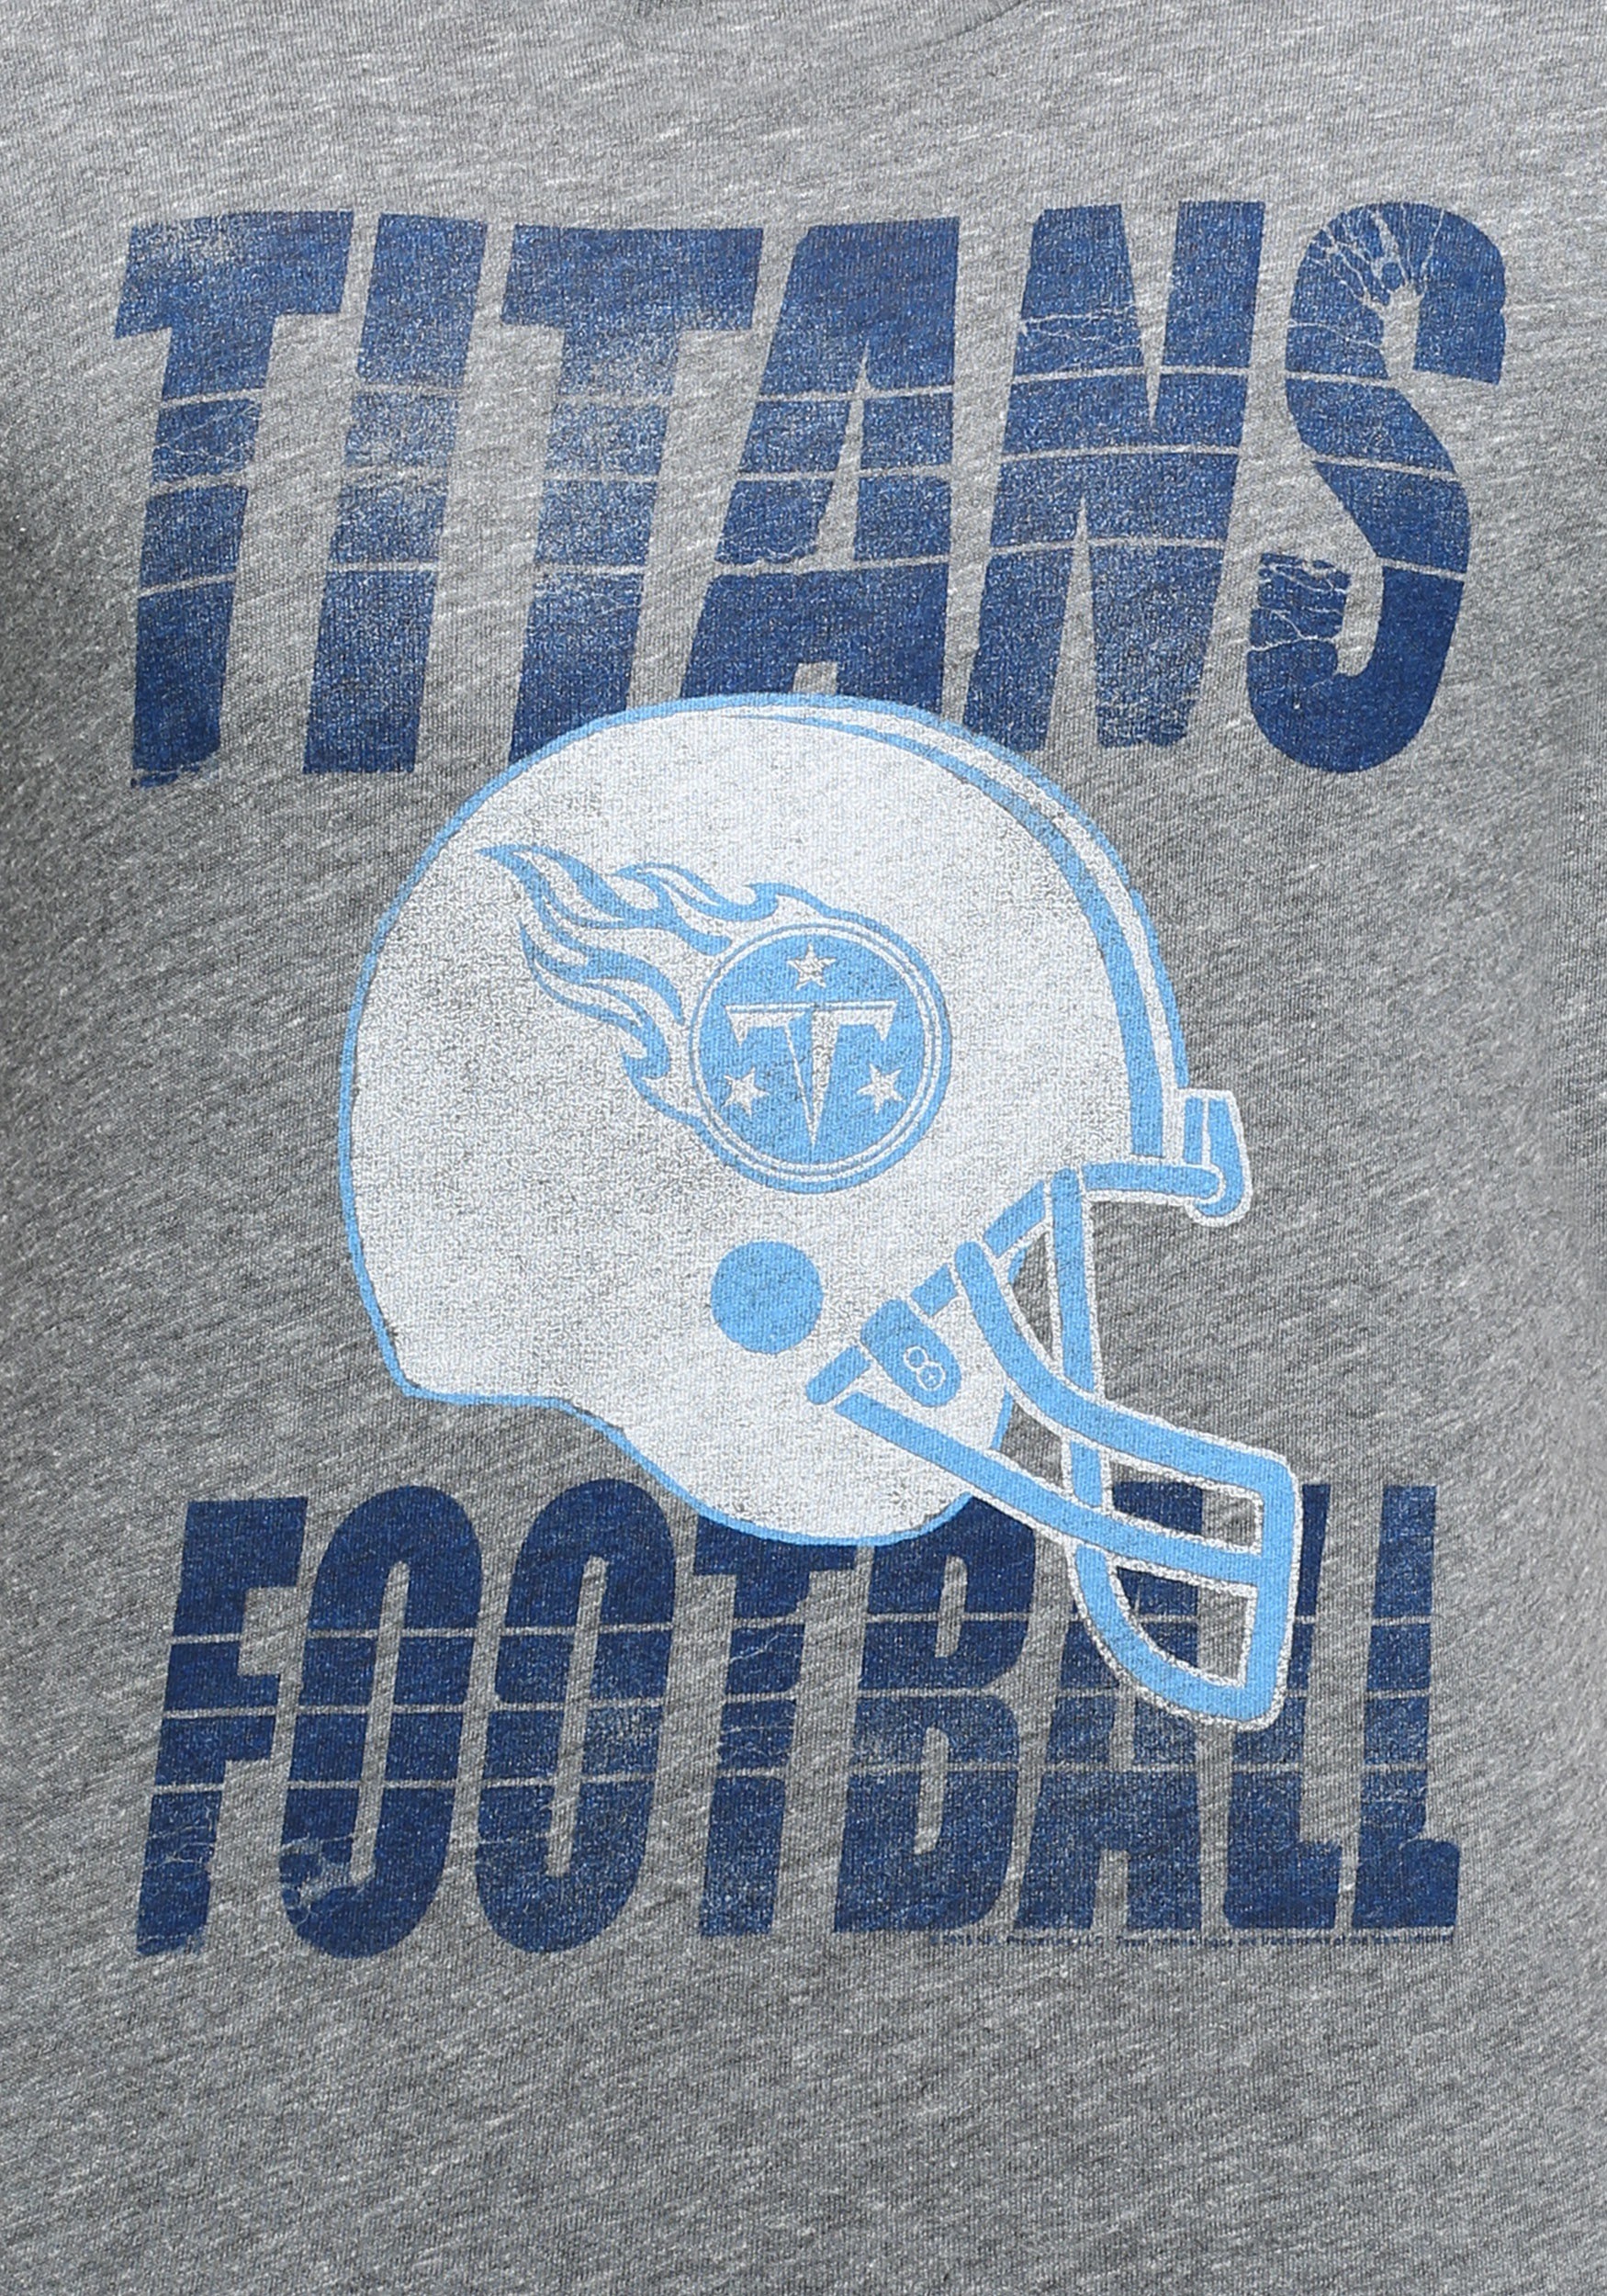 tennessee titans men's shirts